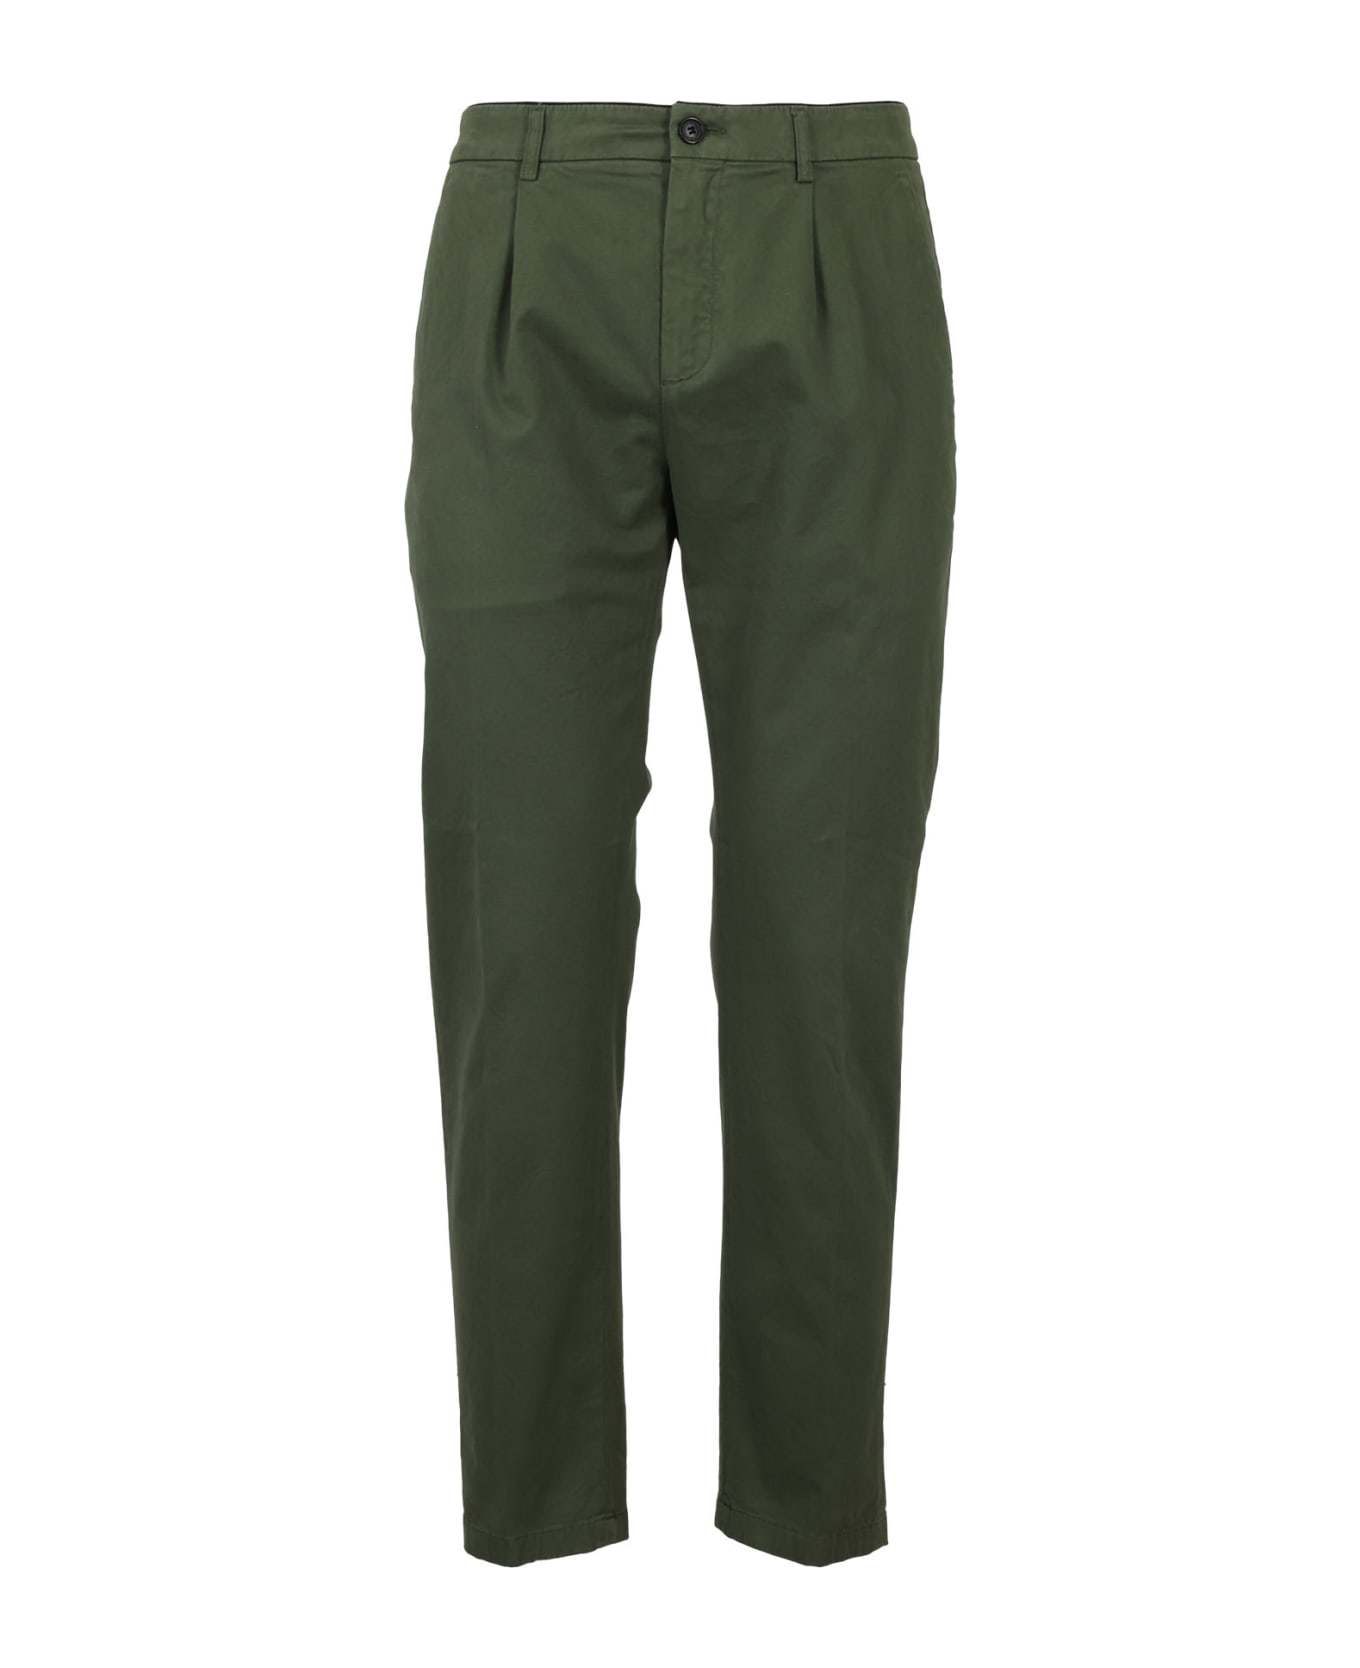 Department Five Prince Pences Chinos - Militare